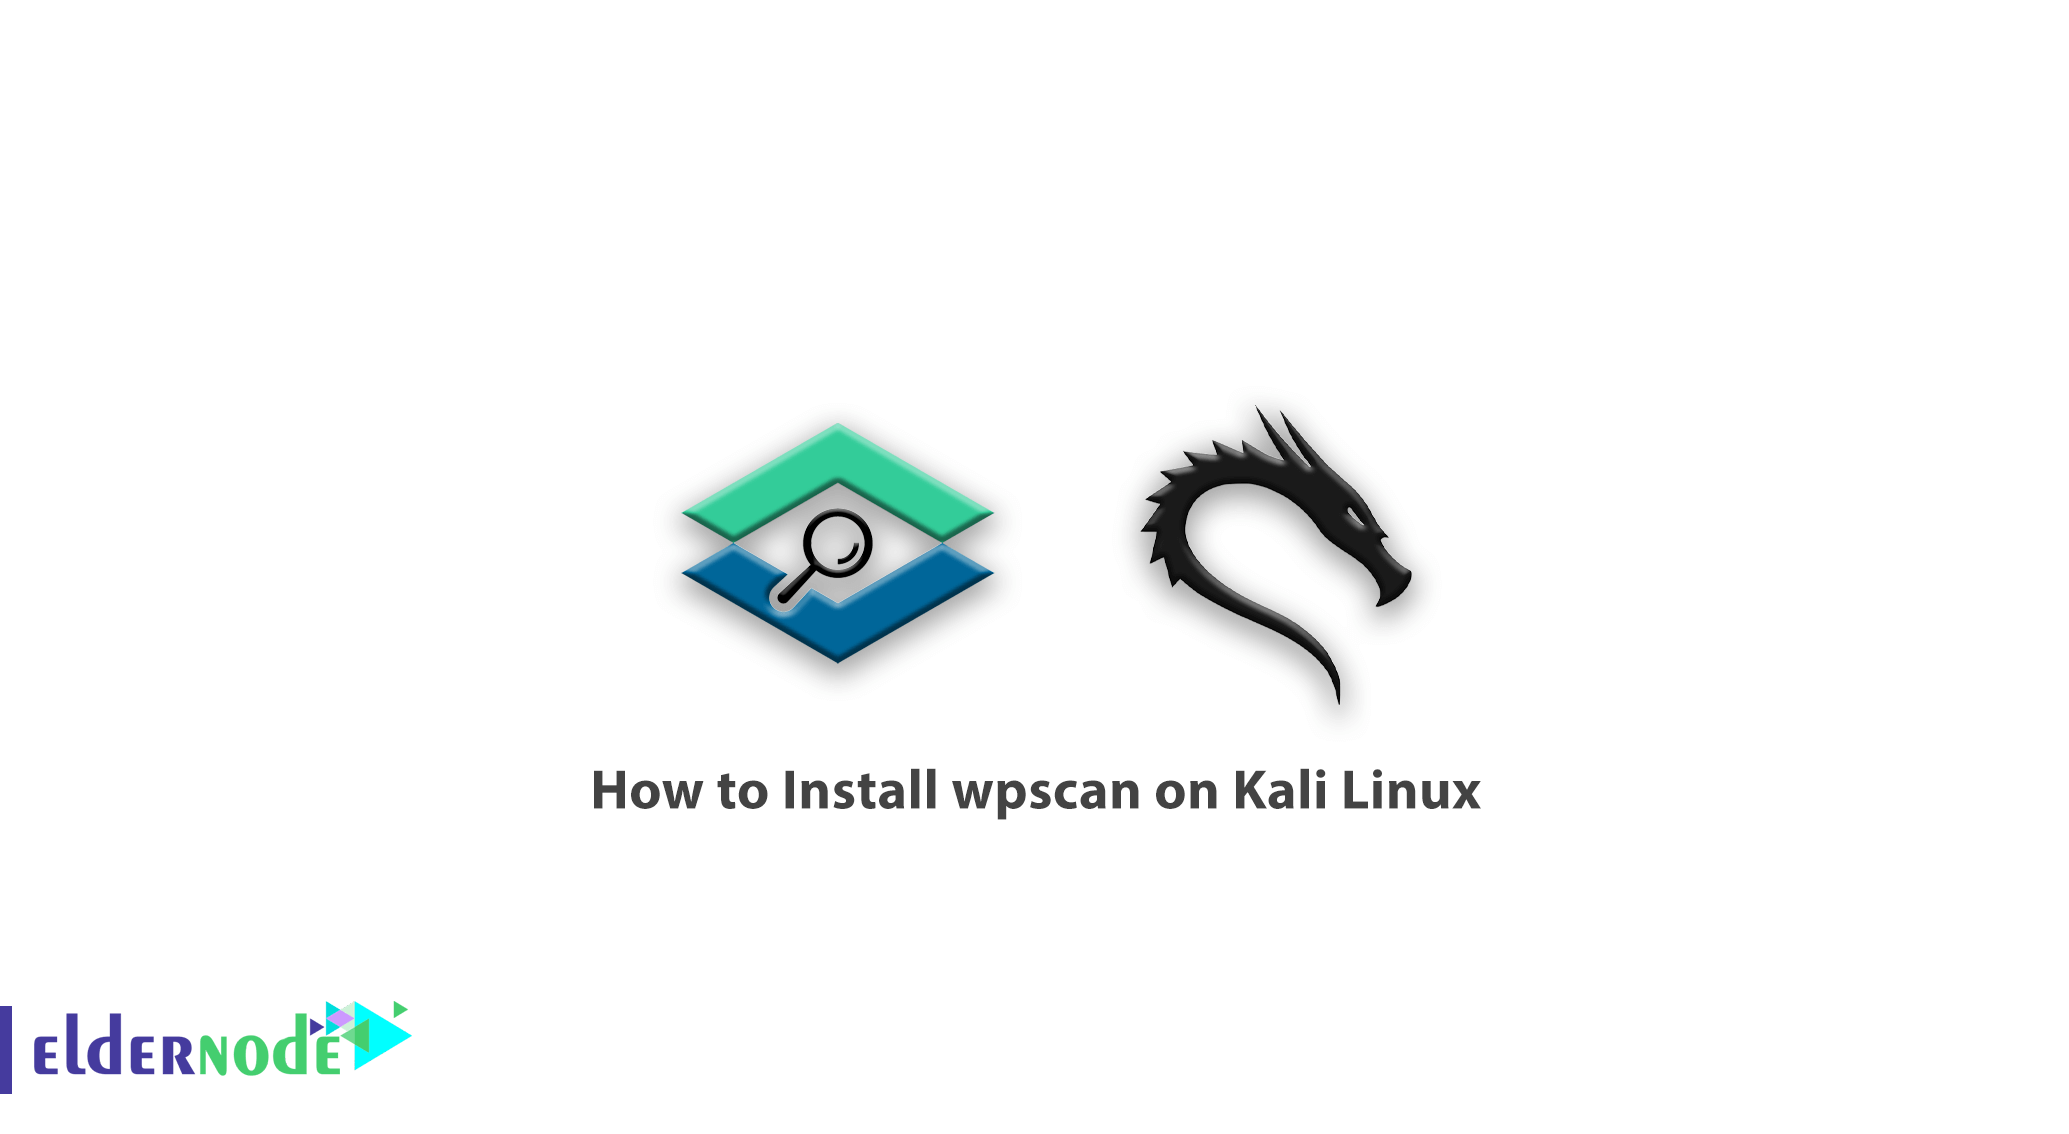 How to Install wpscan on Kali Linux